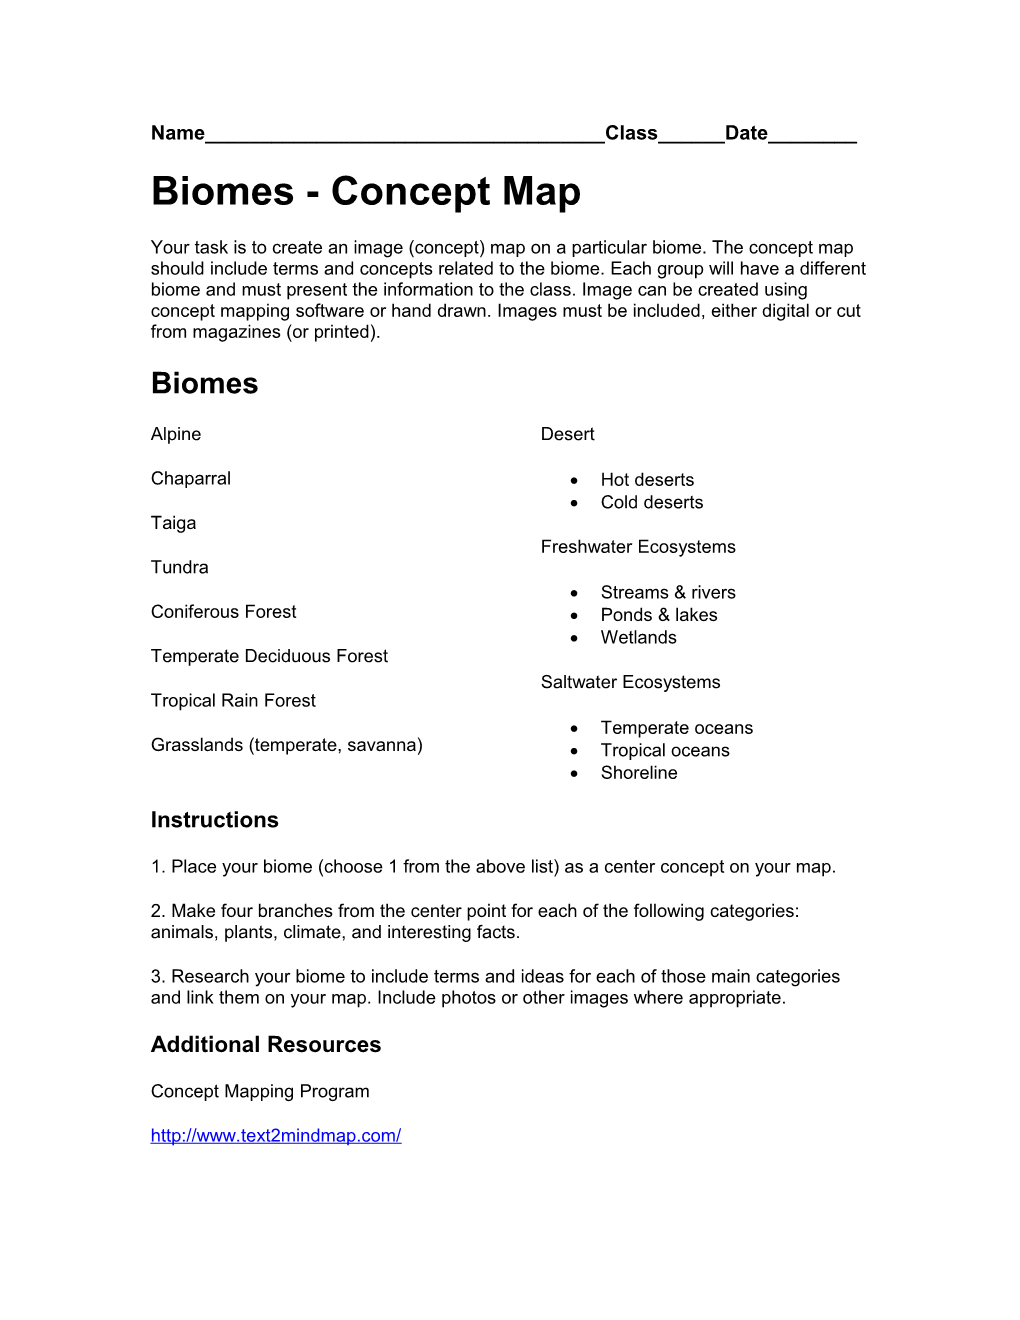 Biomes - Concept Map